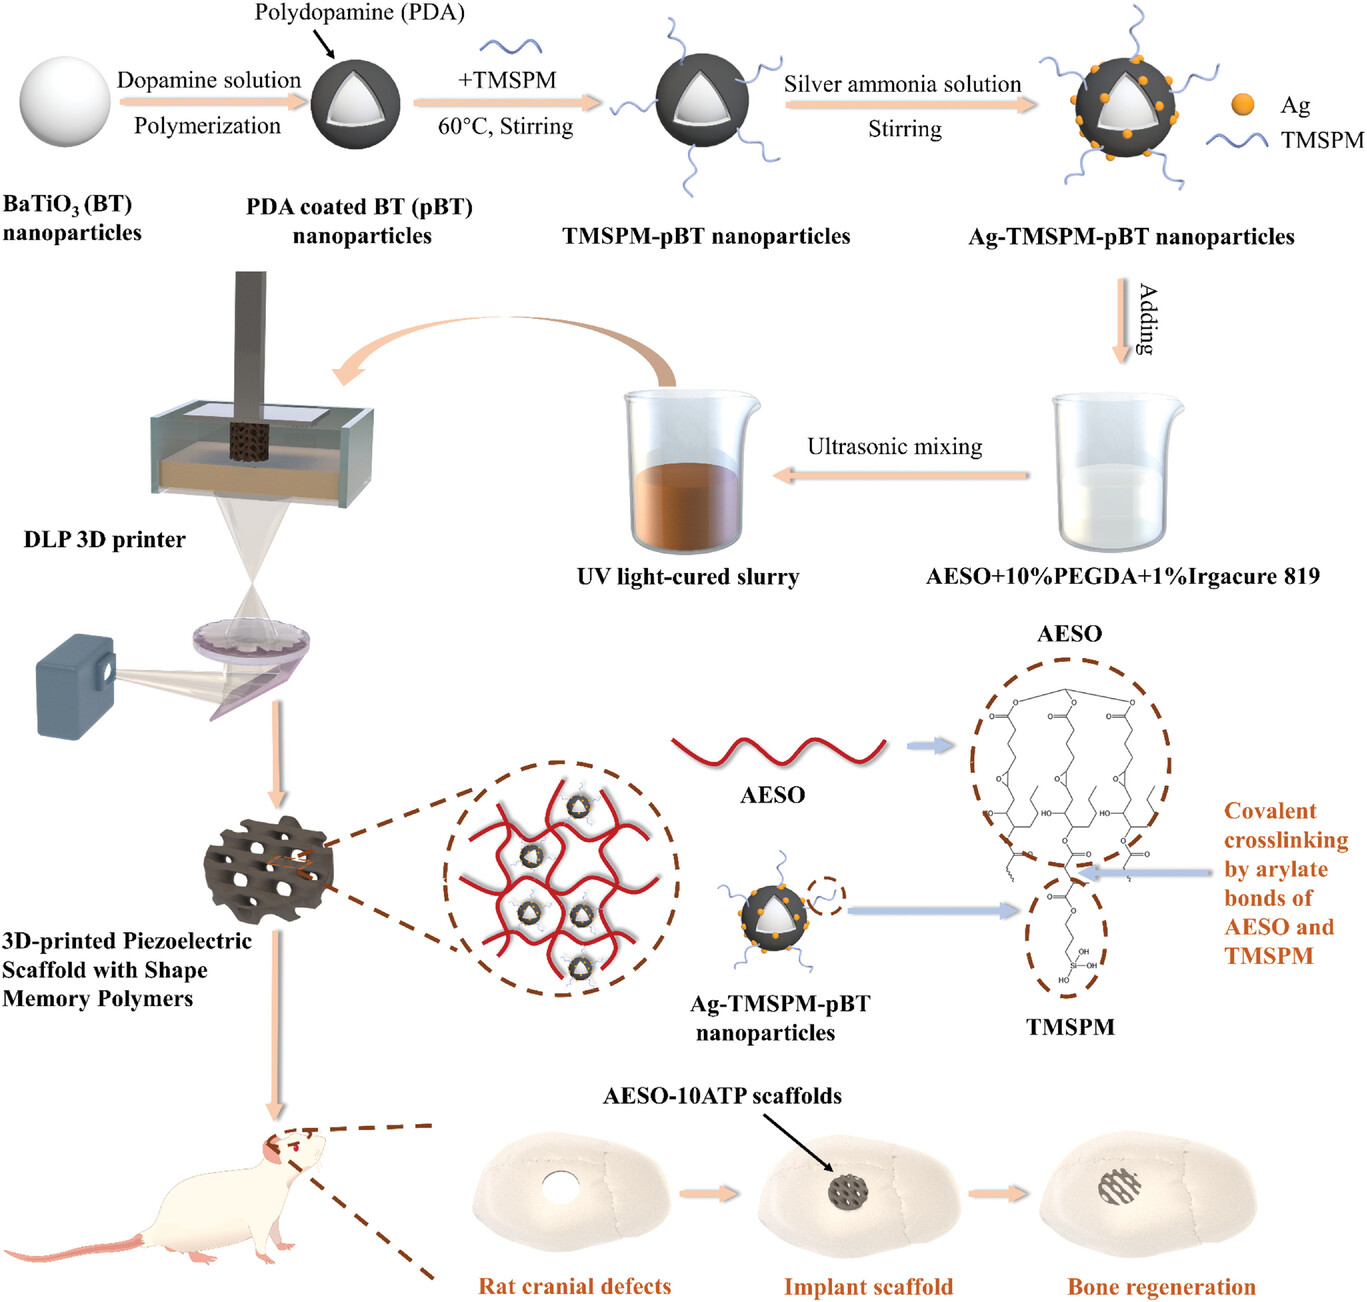 The preparation process of Ag-TMSPM-pBT nanoparticles and the AESO scaffolds doped with 10% Ag-TMSPM-pBT nanoparticles, and application of the AESO-10ATP scaffolds in bone regeneration